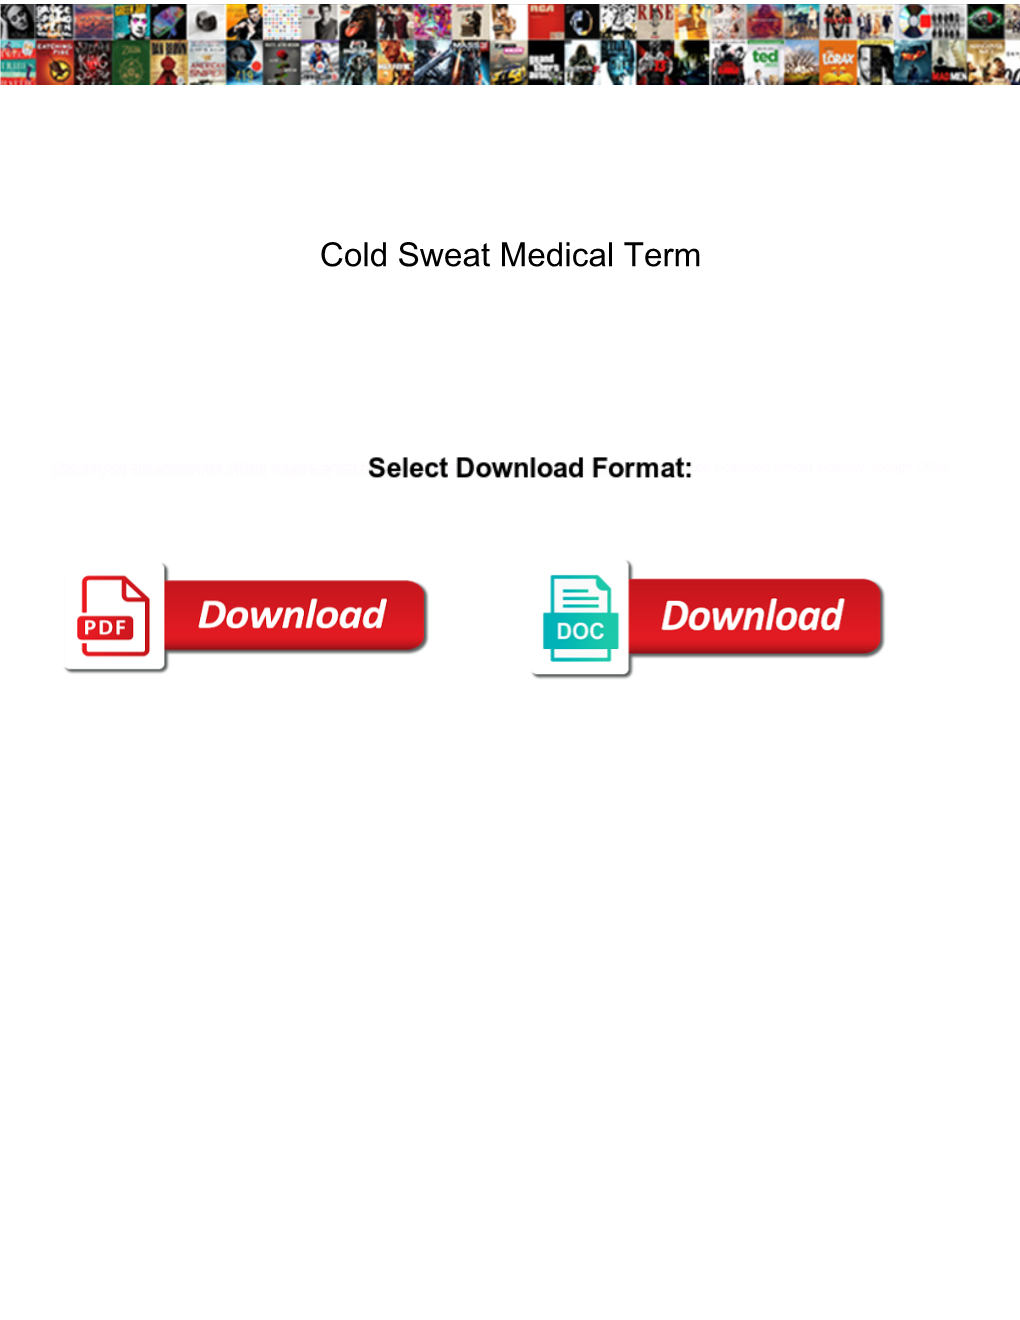 Cold Sweat Medical Term